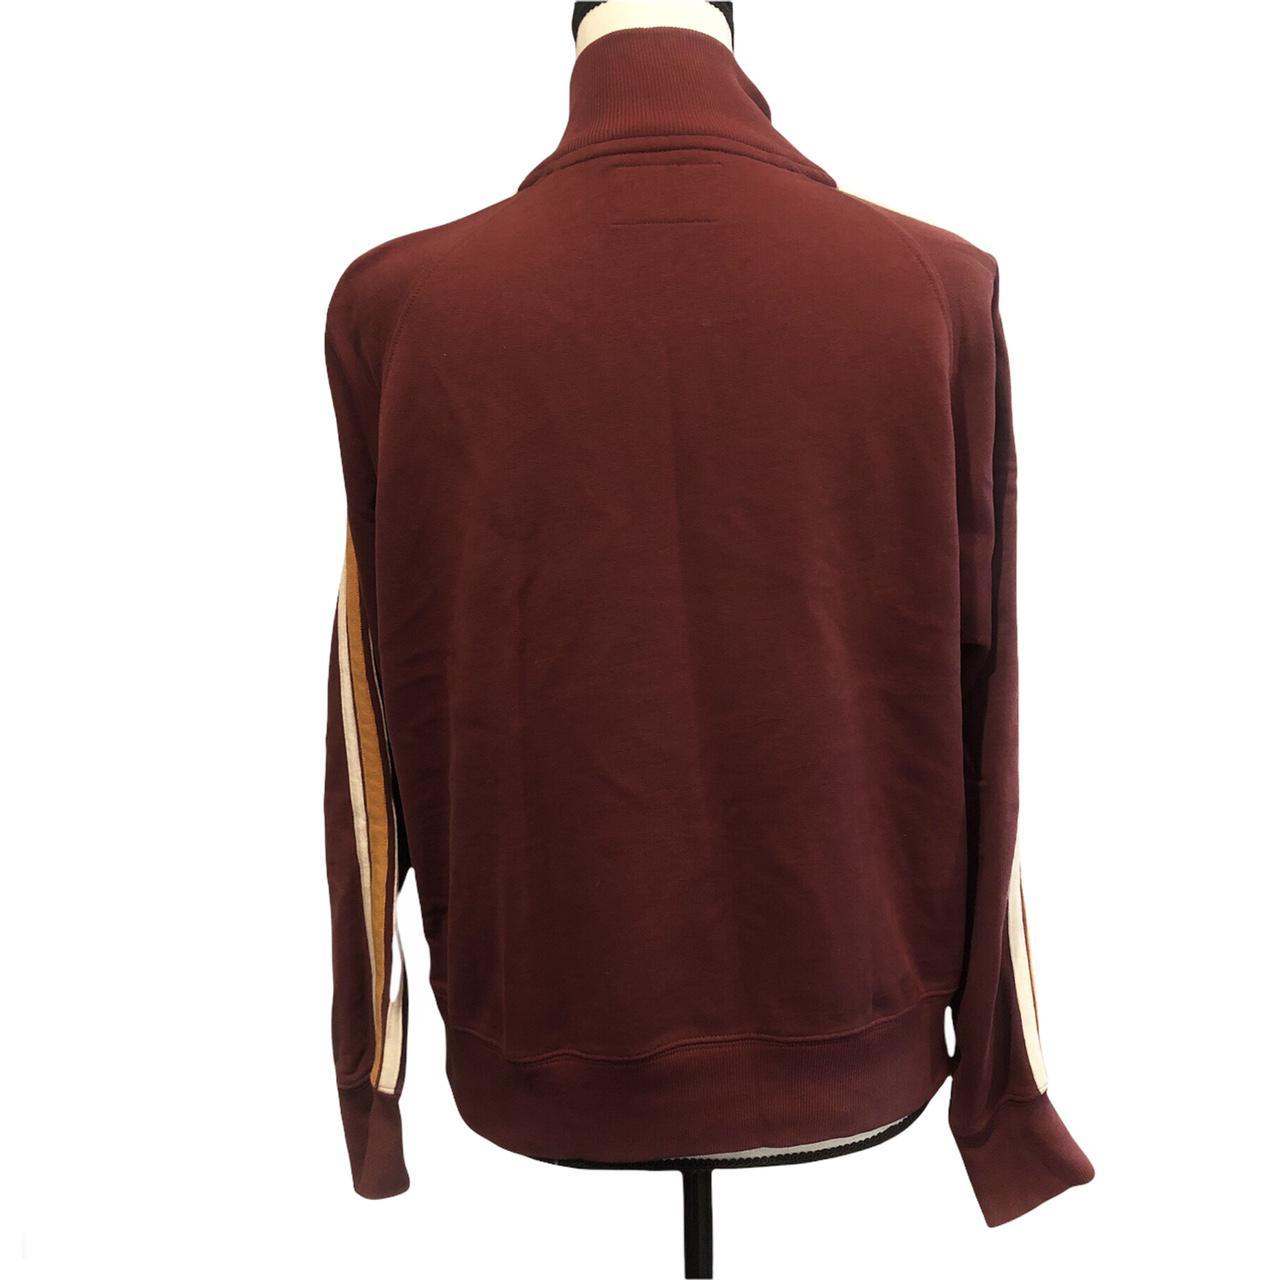 Women's Burgundy and Gold Jacket (2)